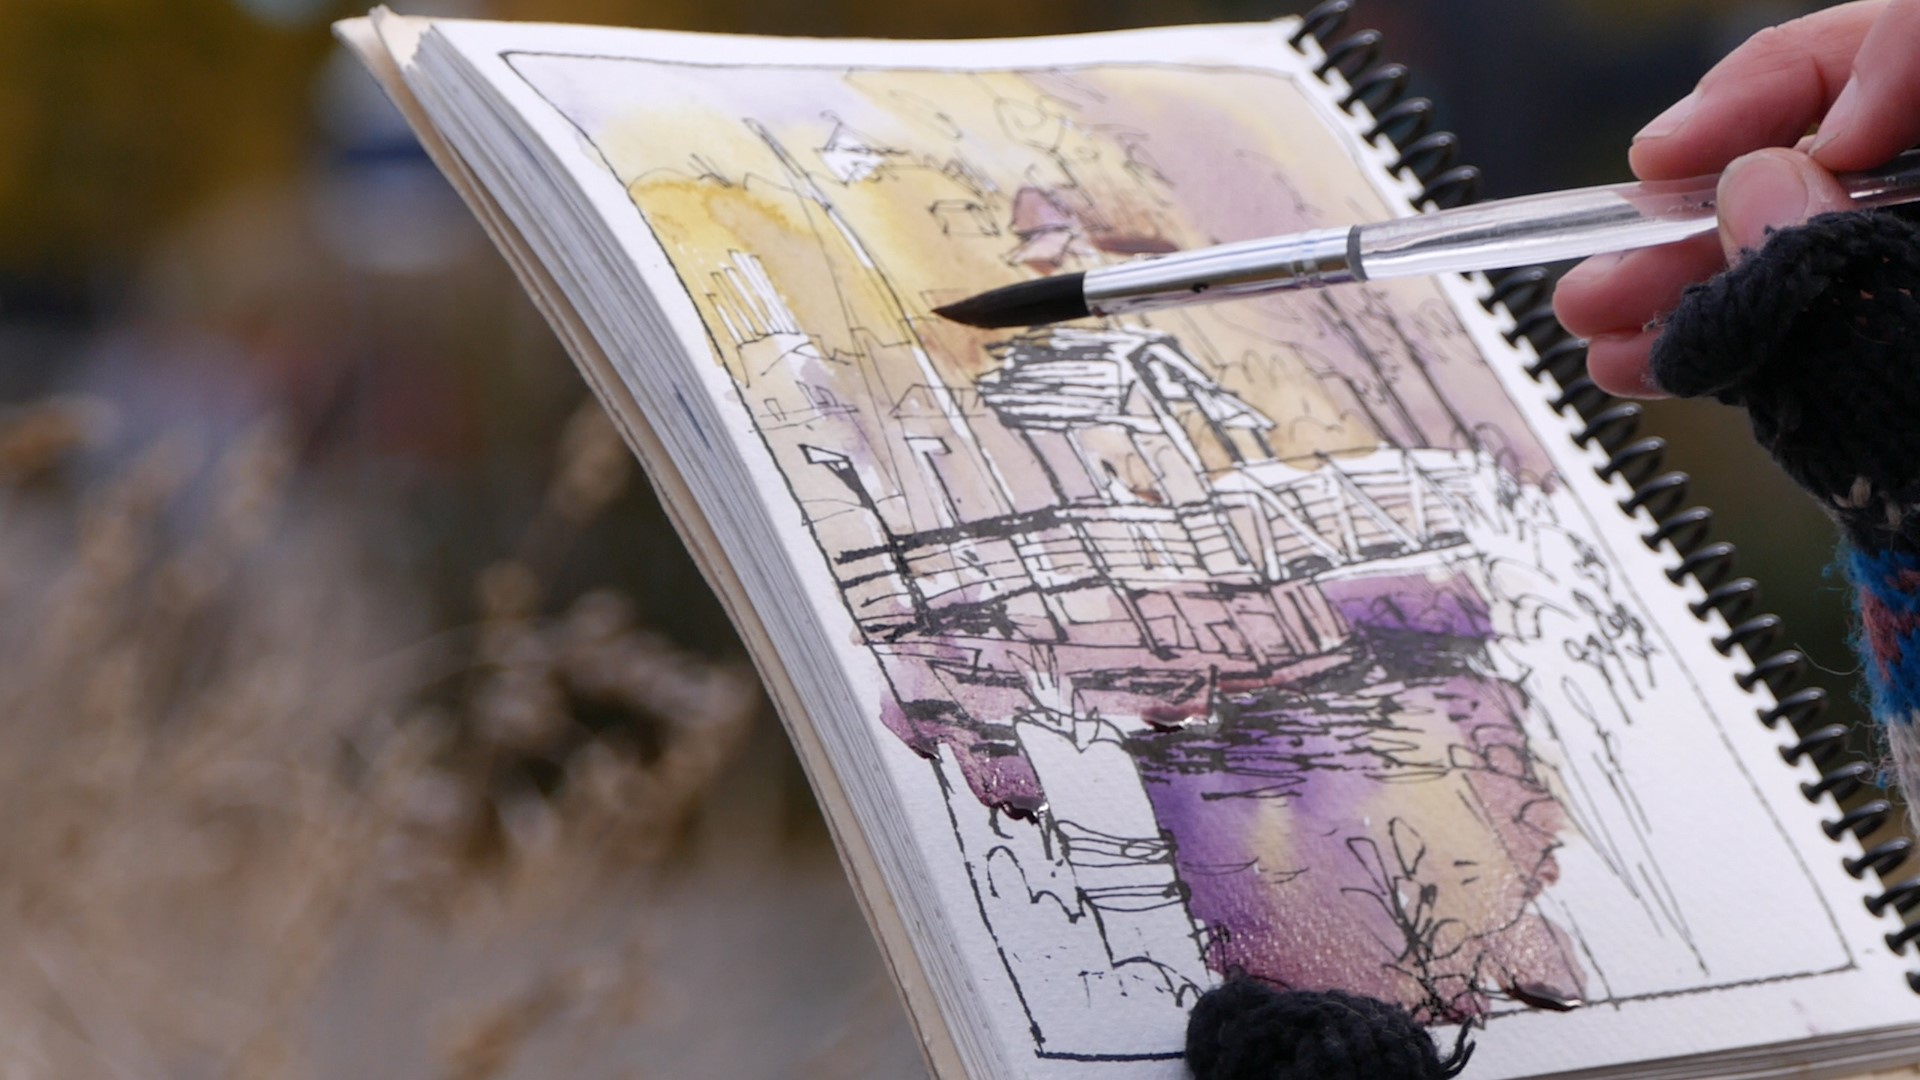 Maybe you've seen Eleanor Doughty, pen and notebook in hand. She's an urban sketcher, and just one of the many artists taking advantage of the natural scenery.